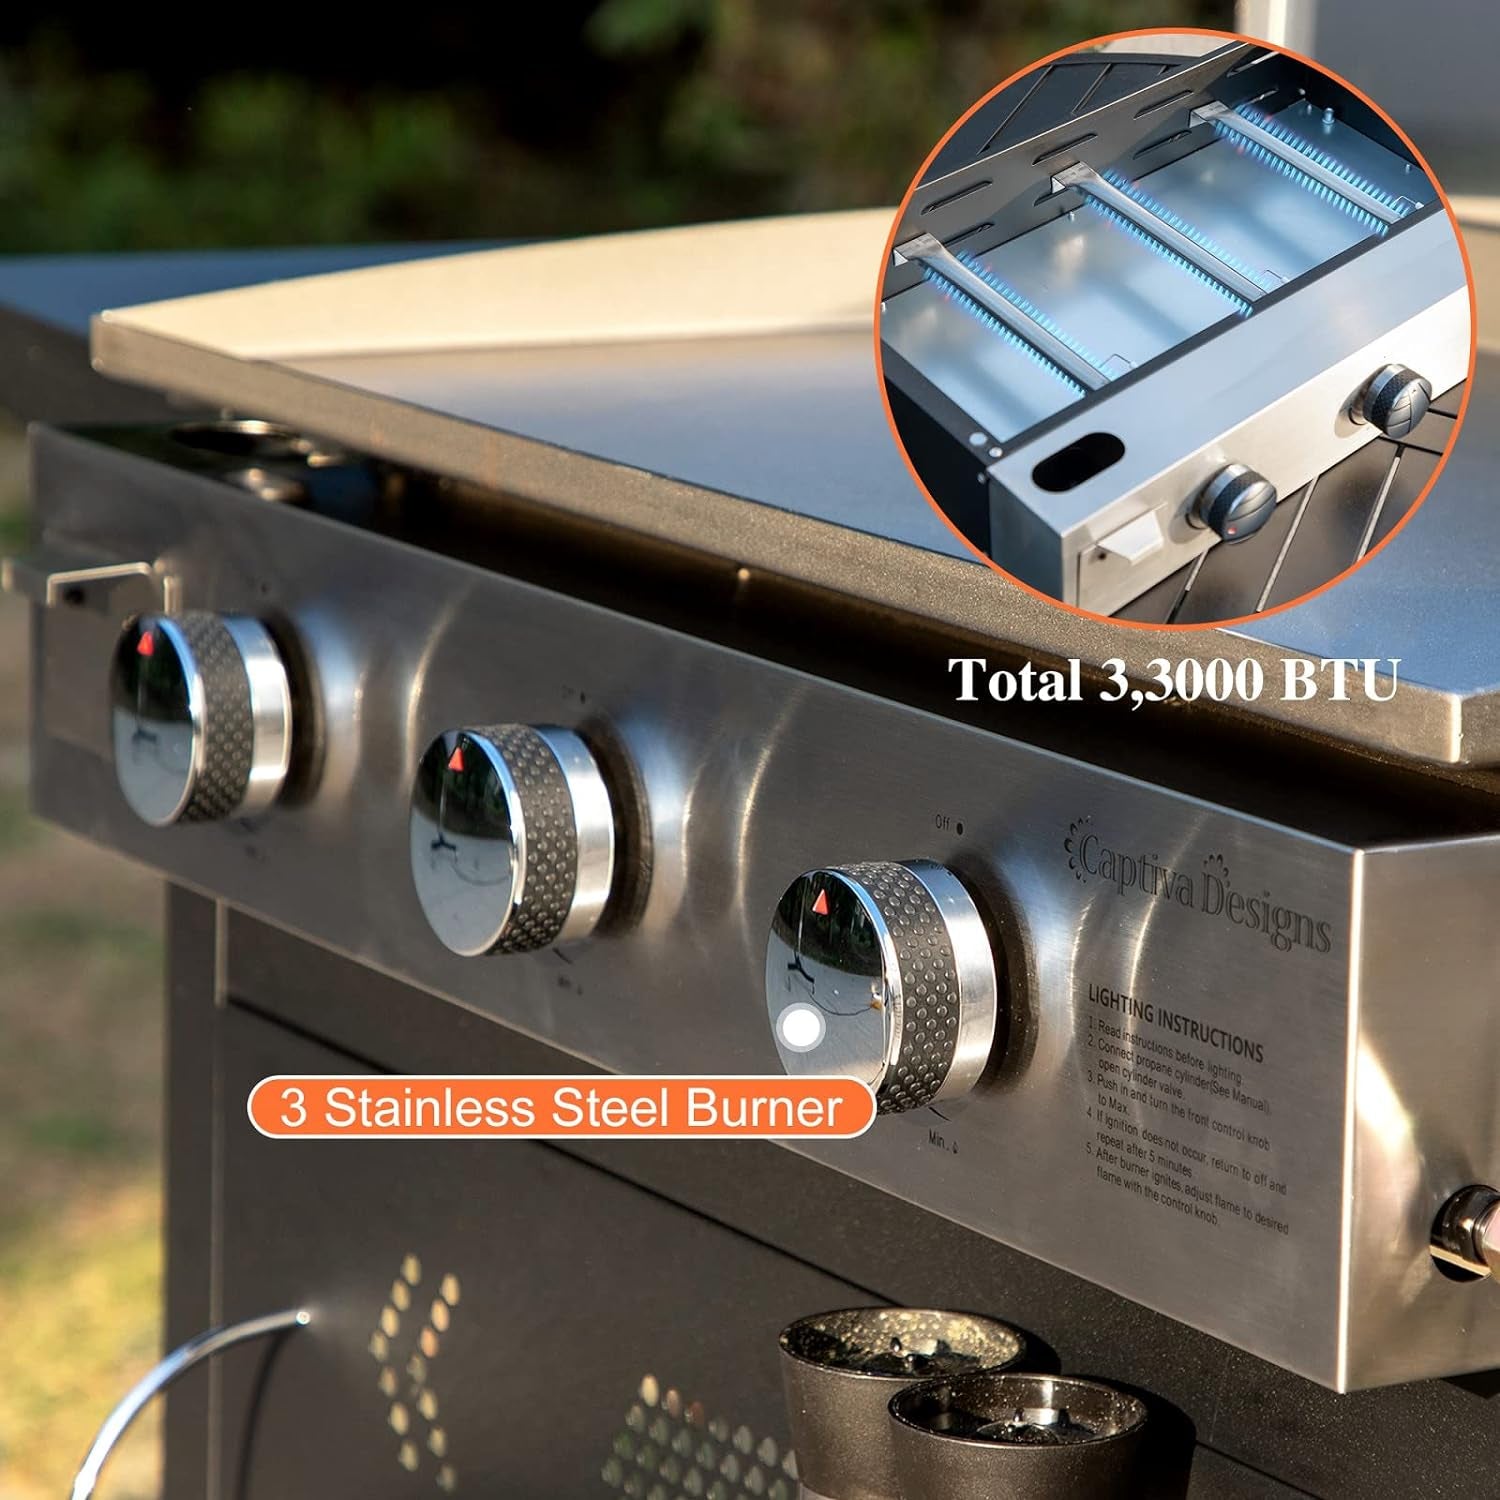 Flat Top Gas Griddle Grill with Lid 3-Burner 33,000 BTU Propane BBQ Grill Outdoor Cooking Station, Can Be Converted into Table Top Griddle for Camping